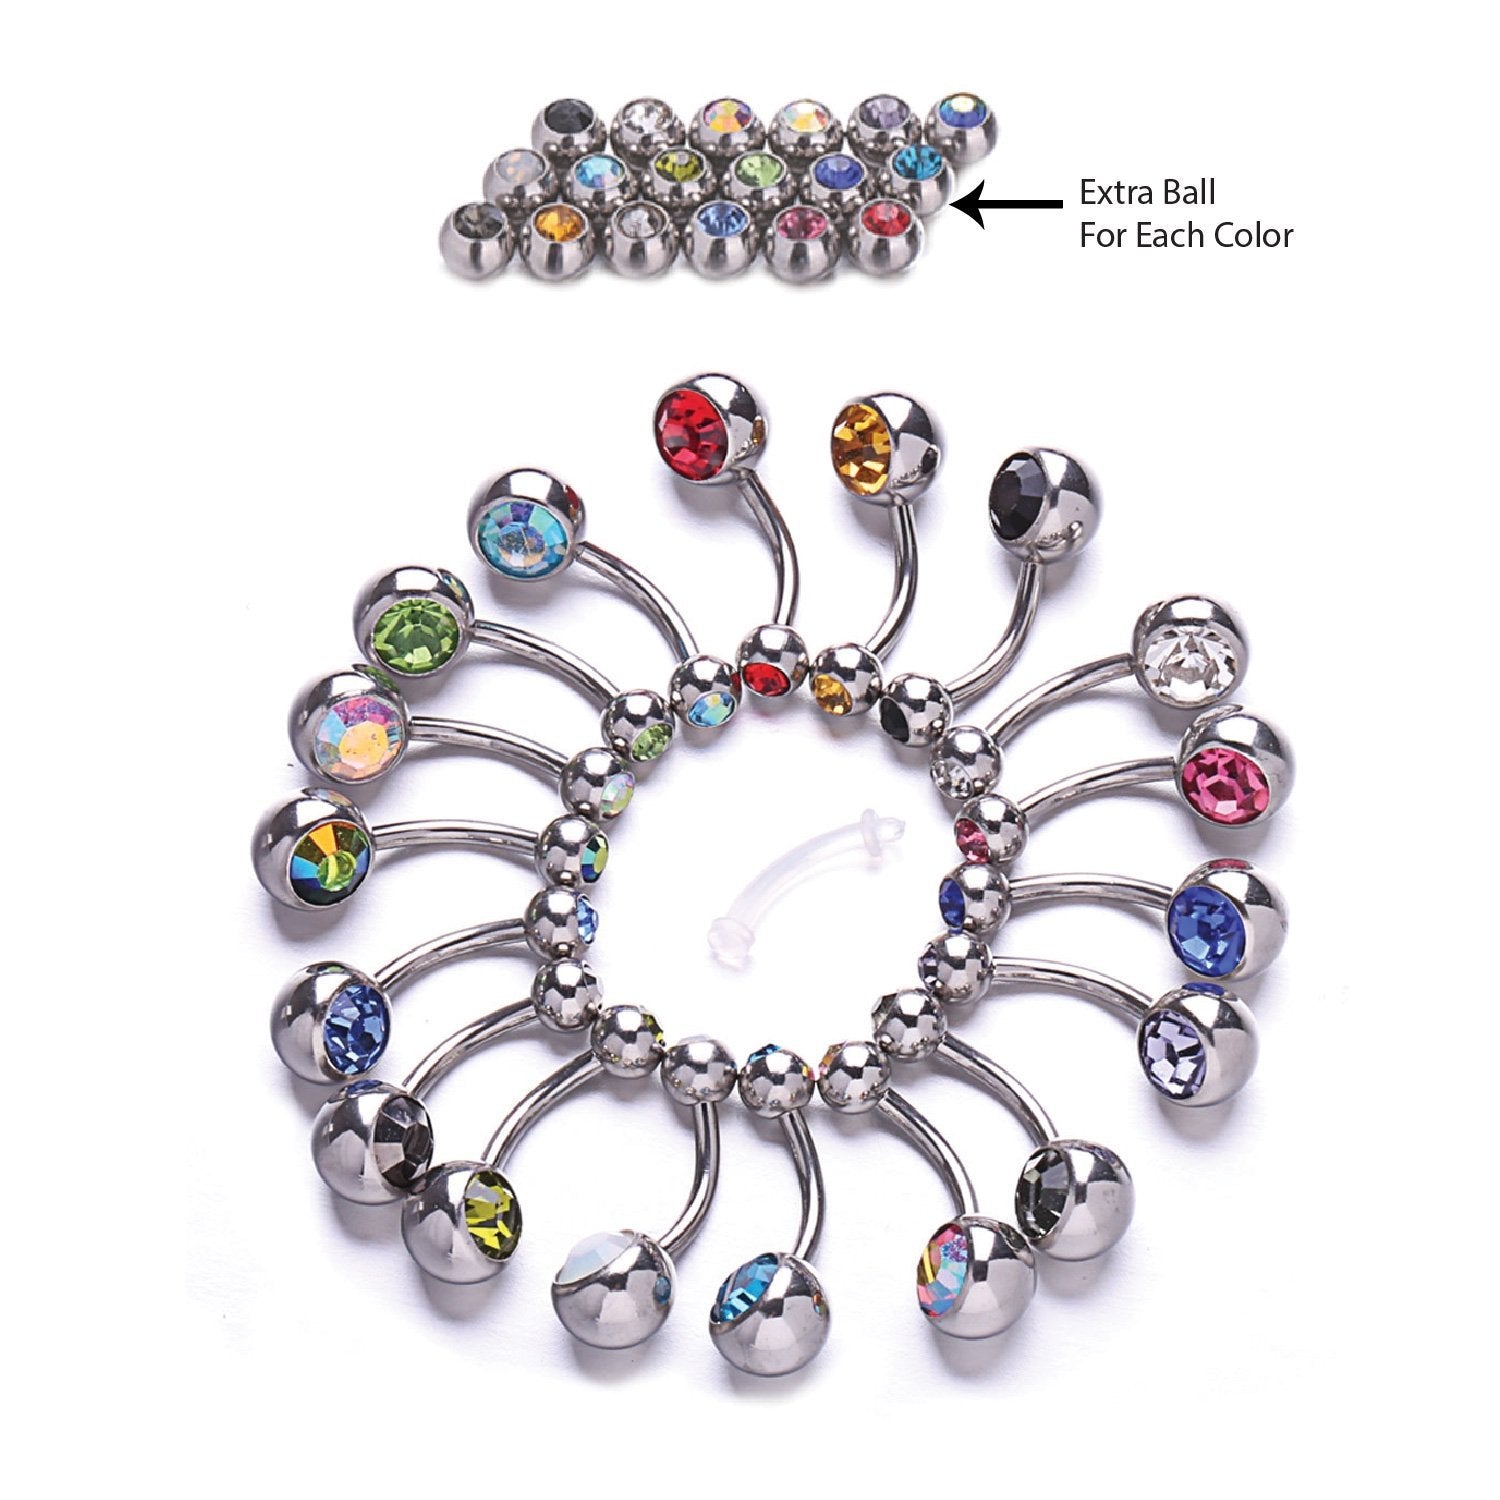 BodyJ4You 5PC Belly Button Rings 14G Stainless Steel CZ Women Navel Body  Piercing Jewelry Set